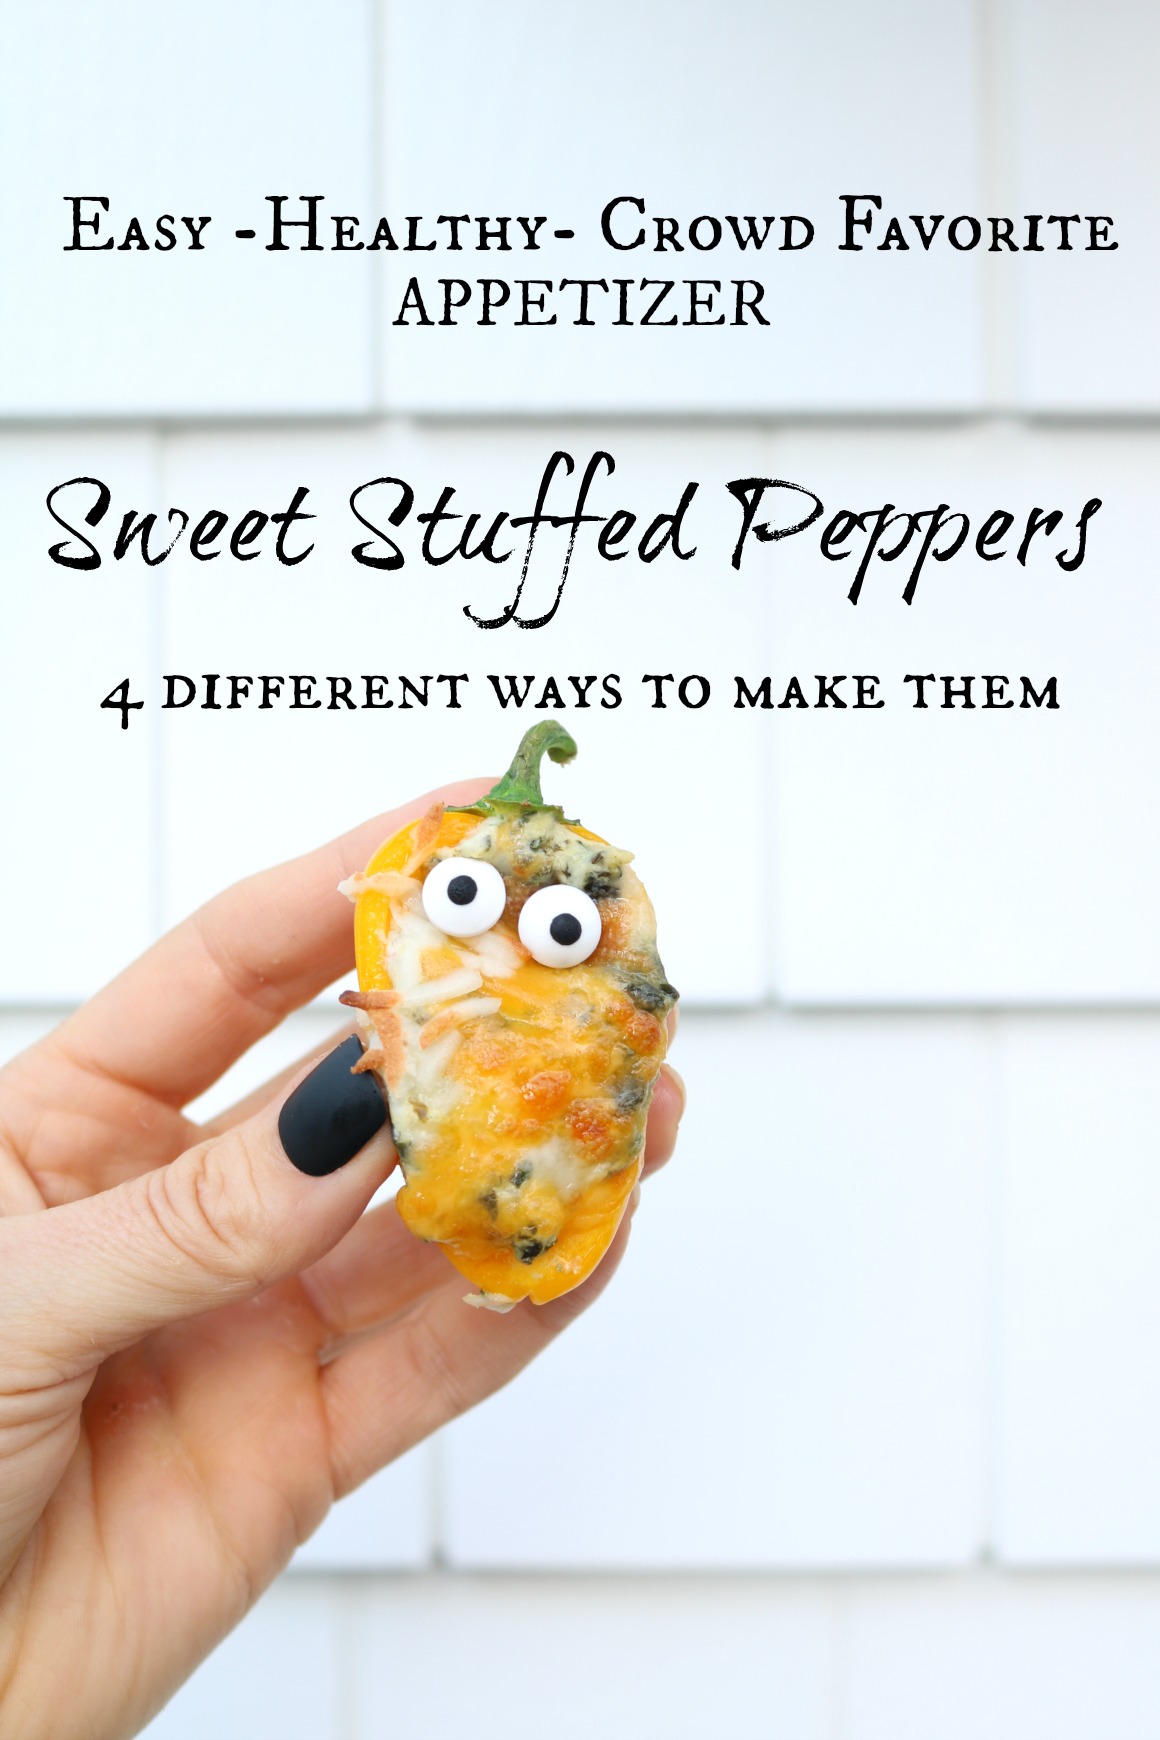 Sweet Stuffed Peppers- Four Different Ways